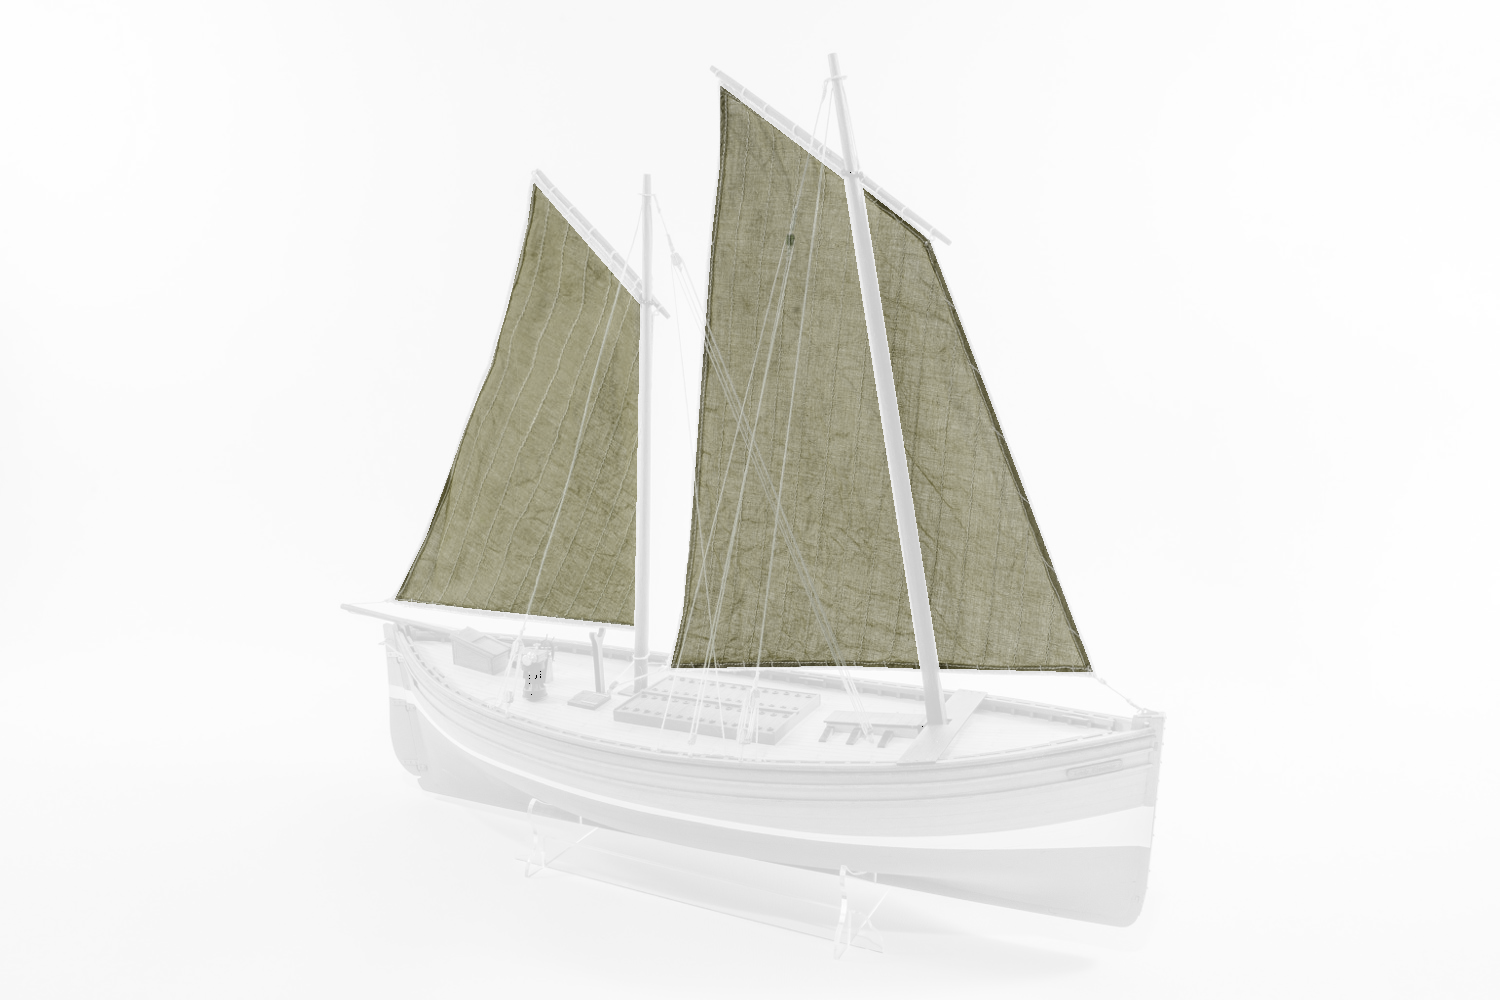 Sails for "Lady Eleanor" 1:64